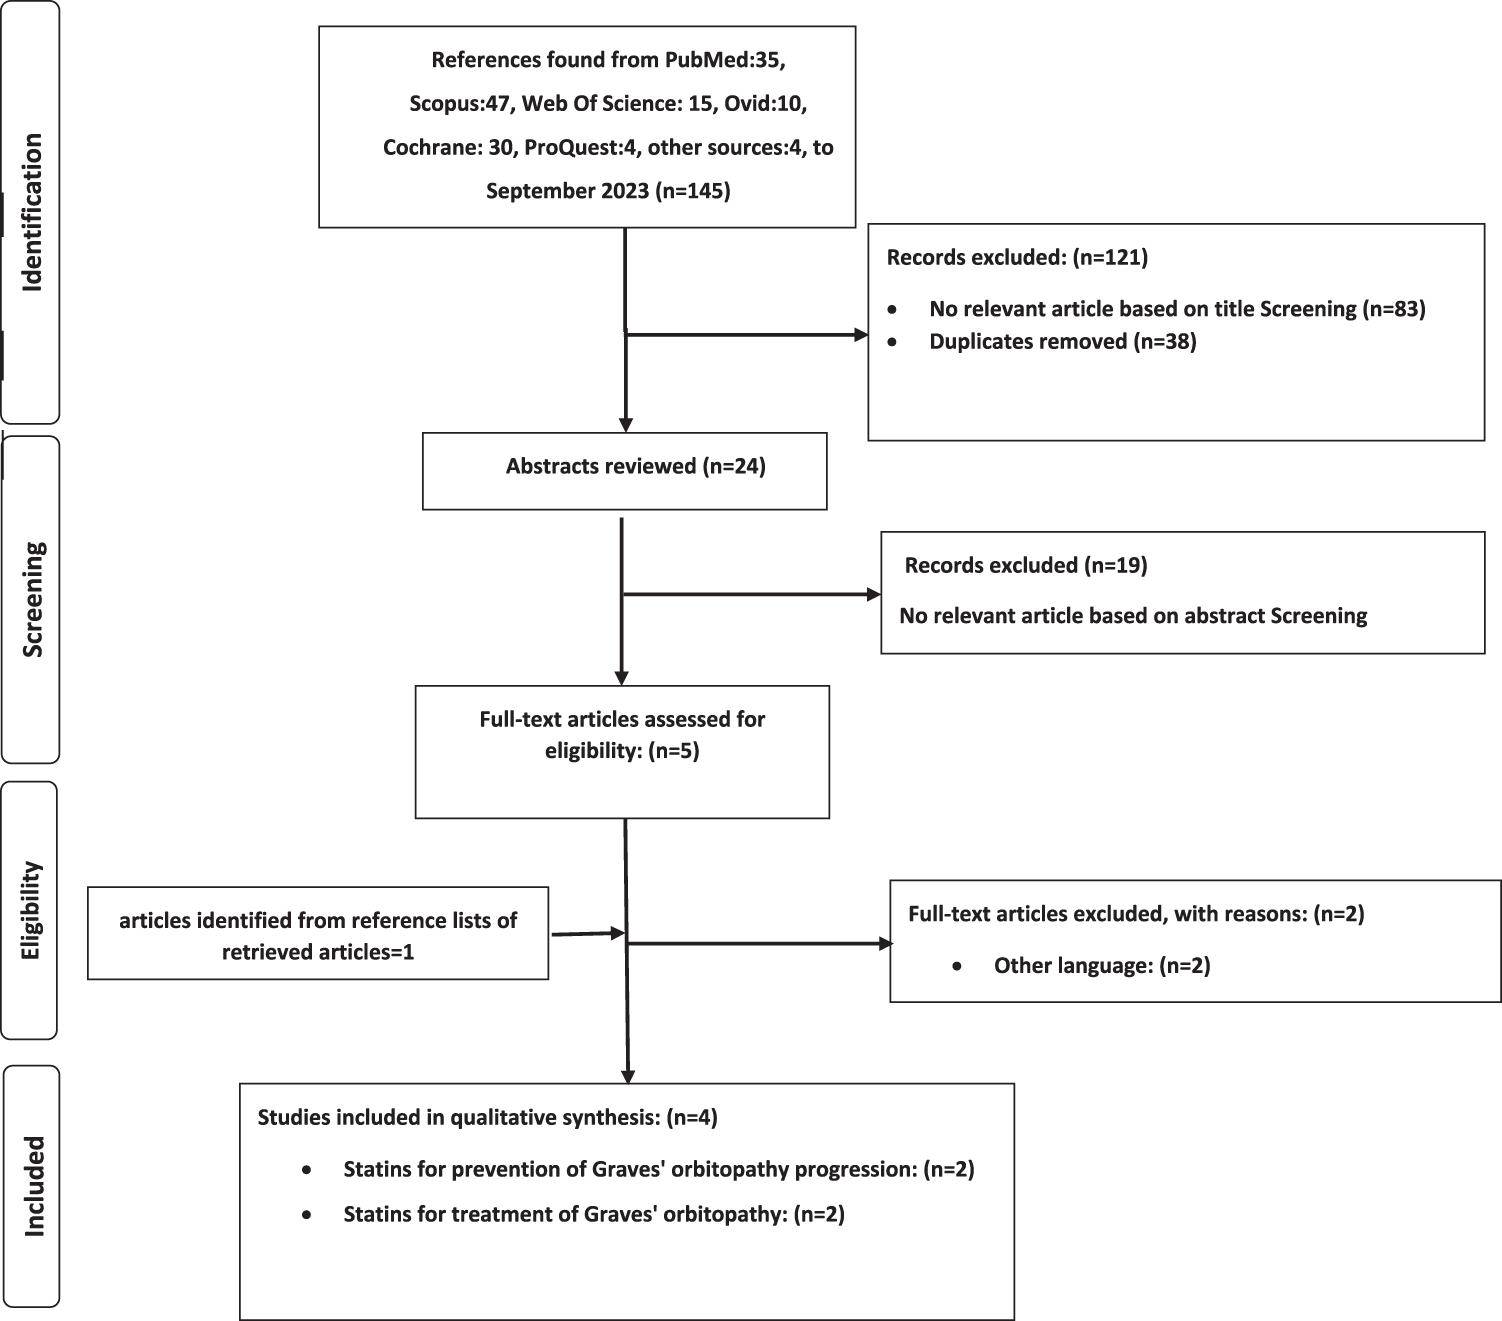 Statins and thyroid eye disease (TED): a systematic review